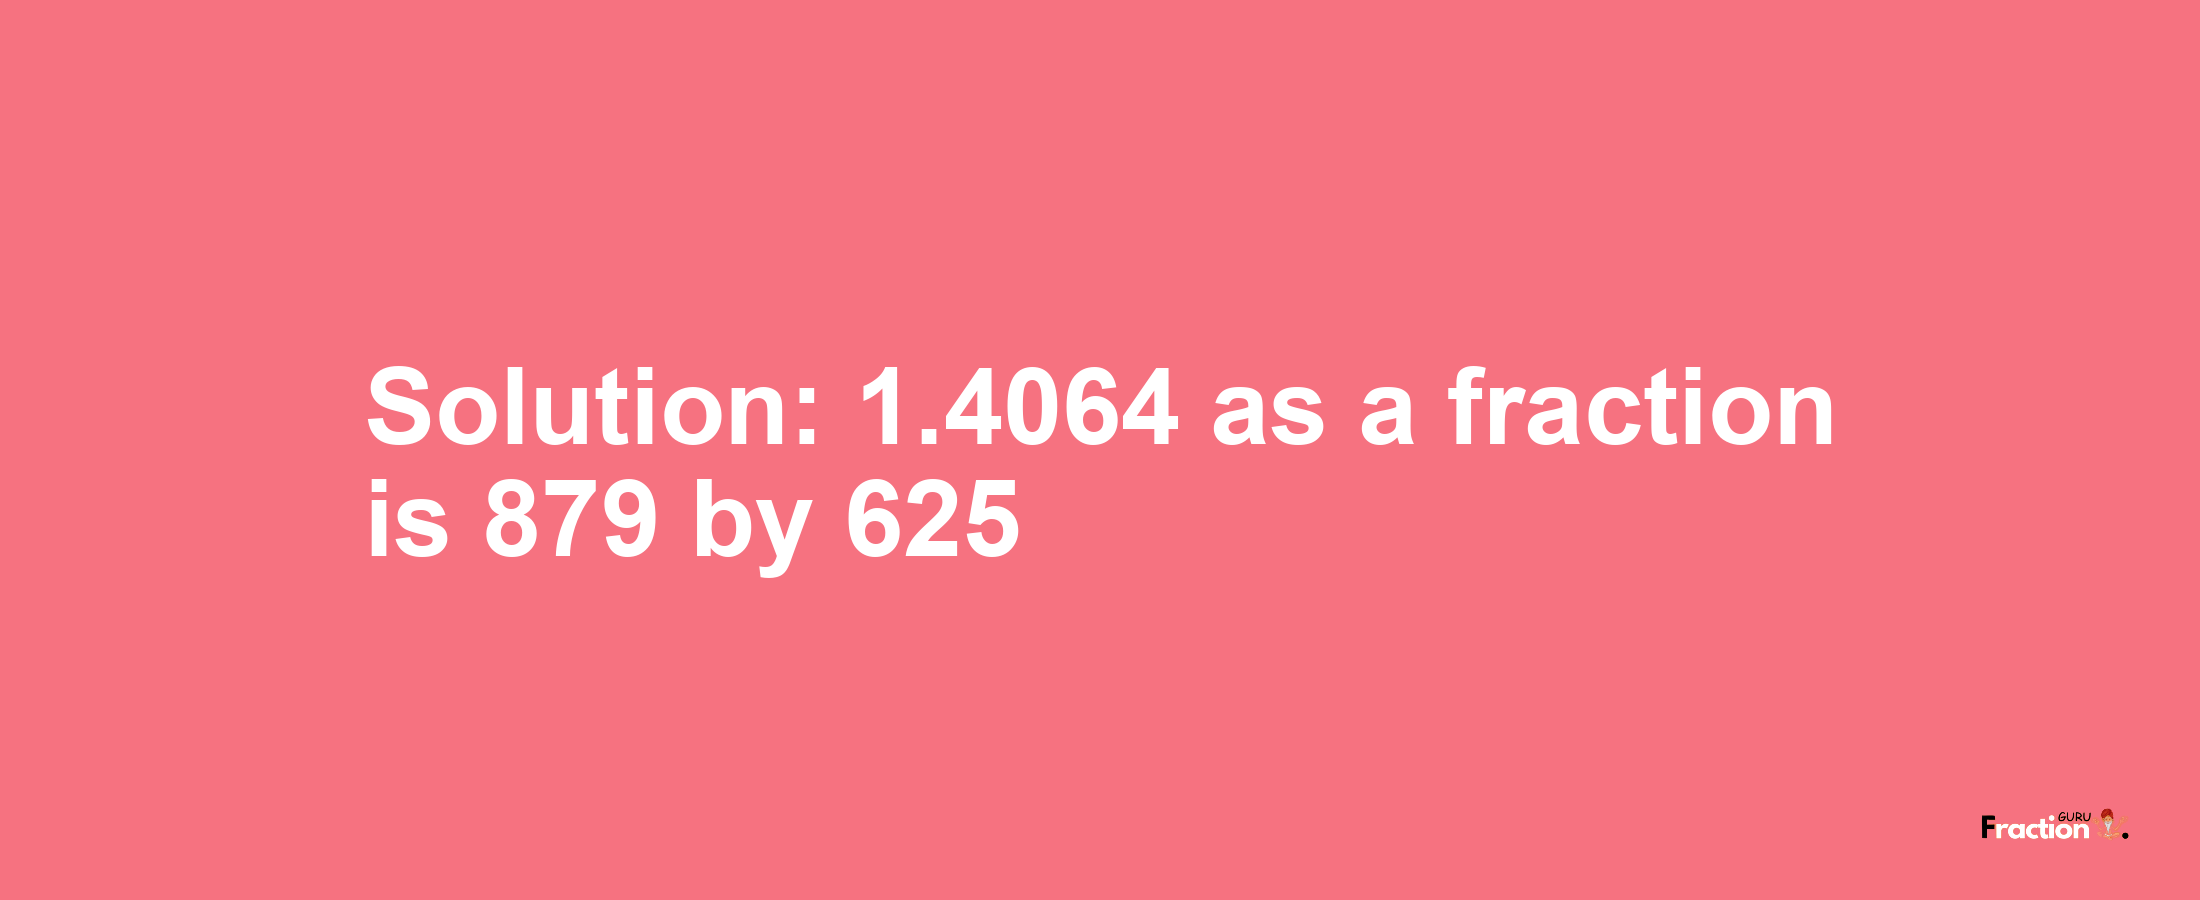 Solution:1.4064 as a fraction is 879/625